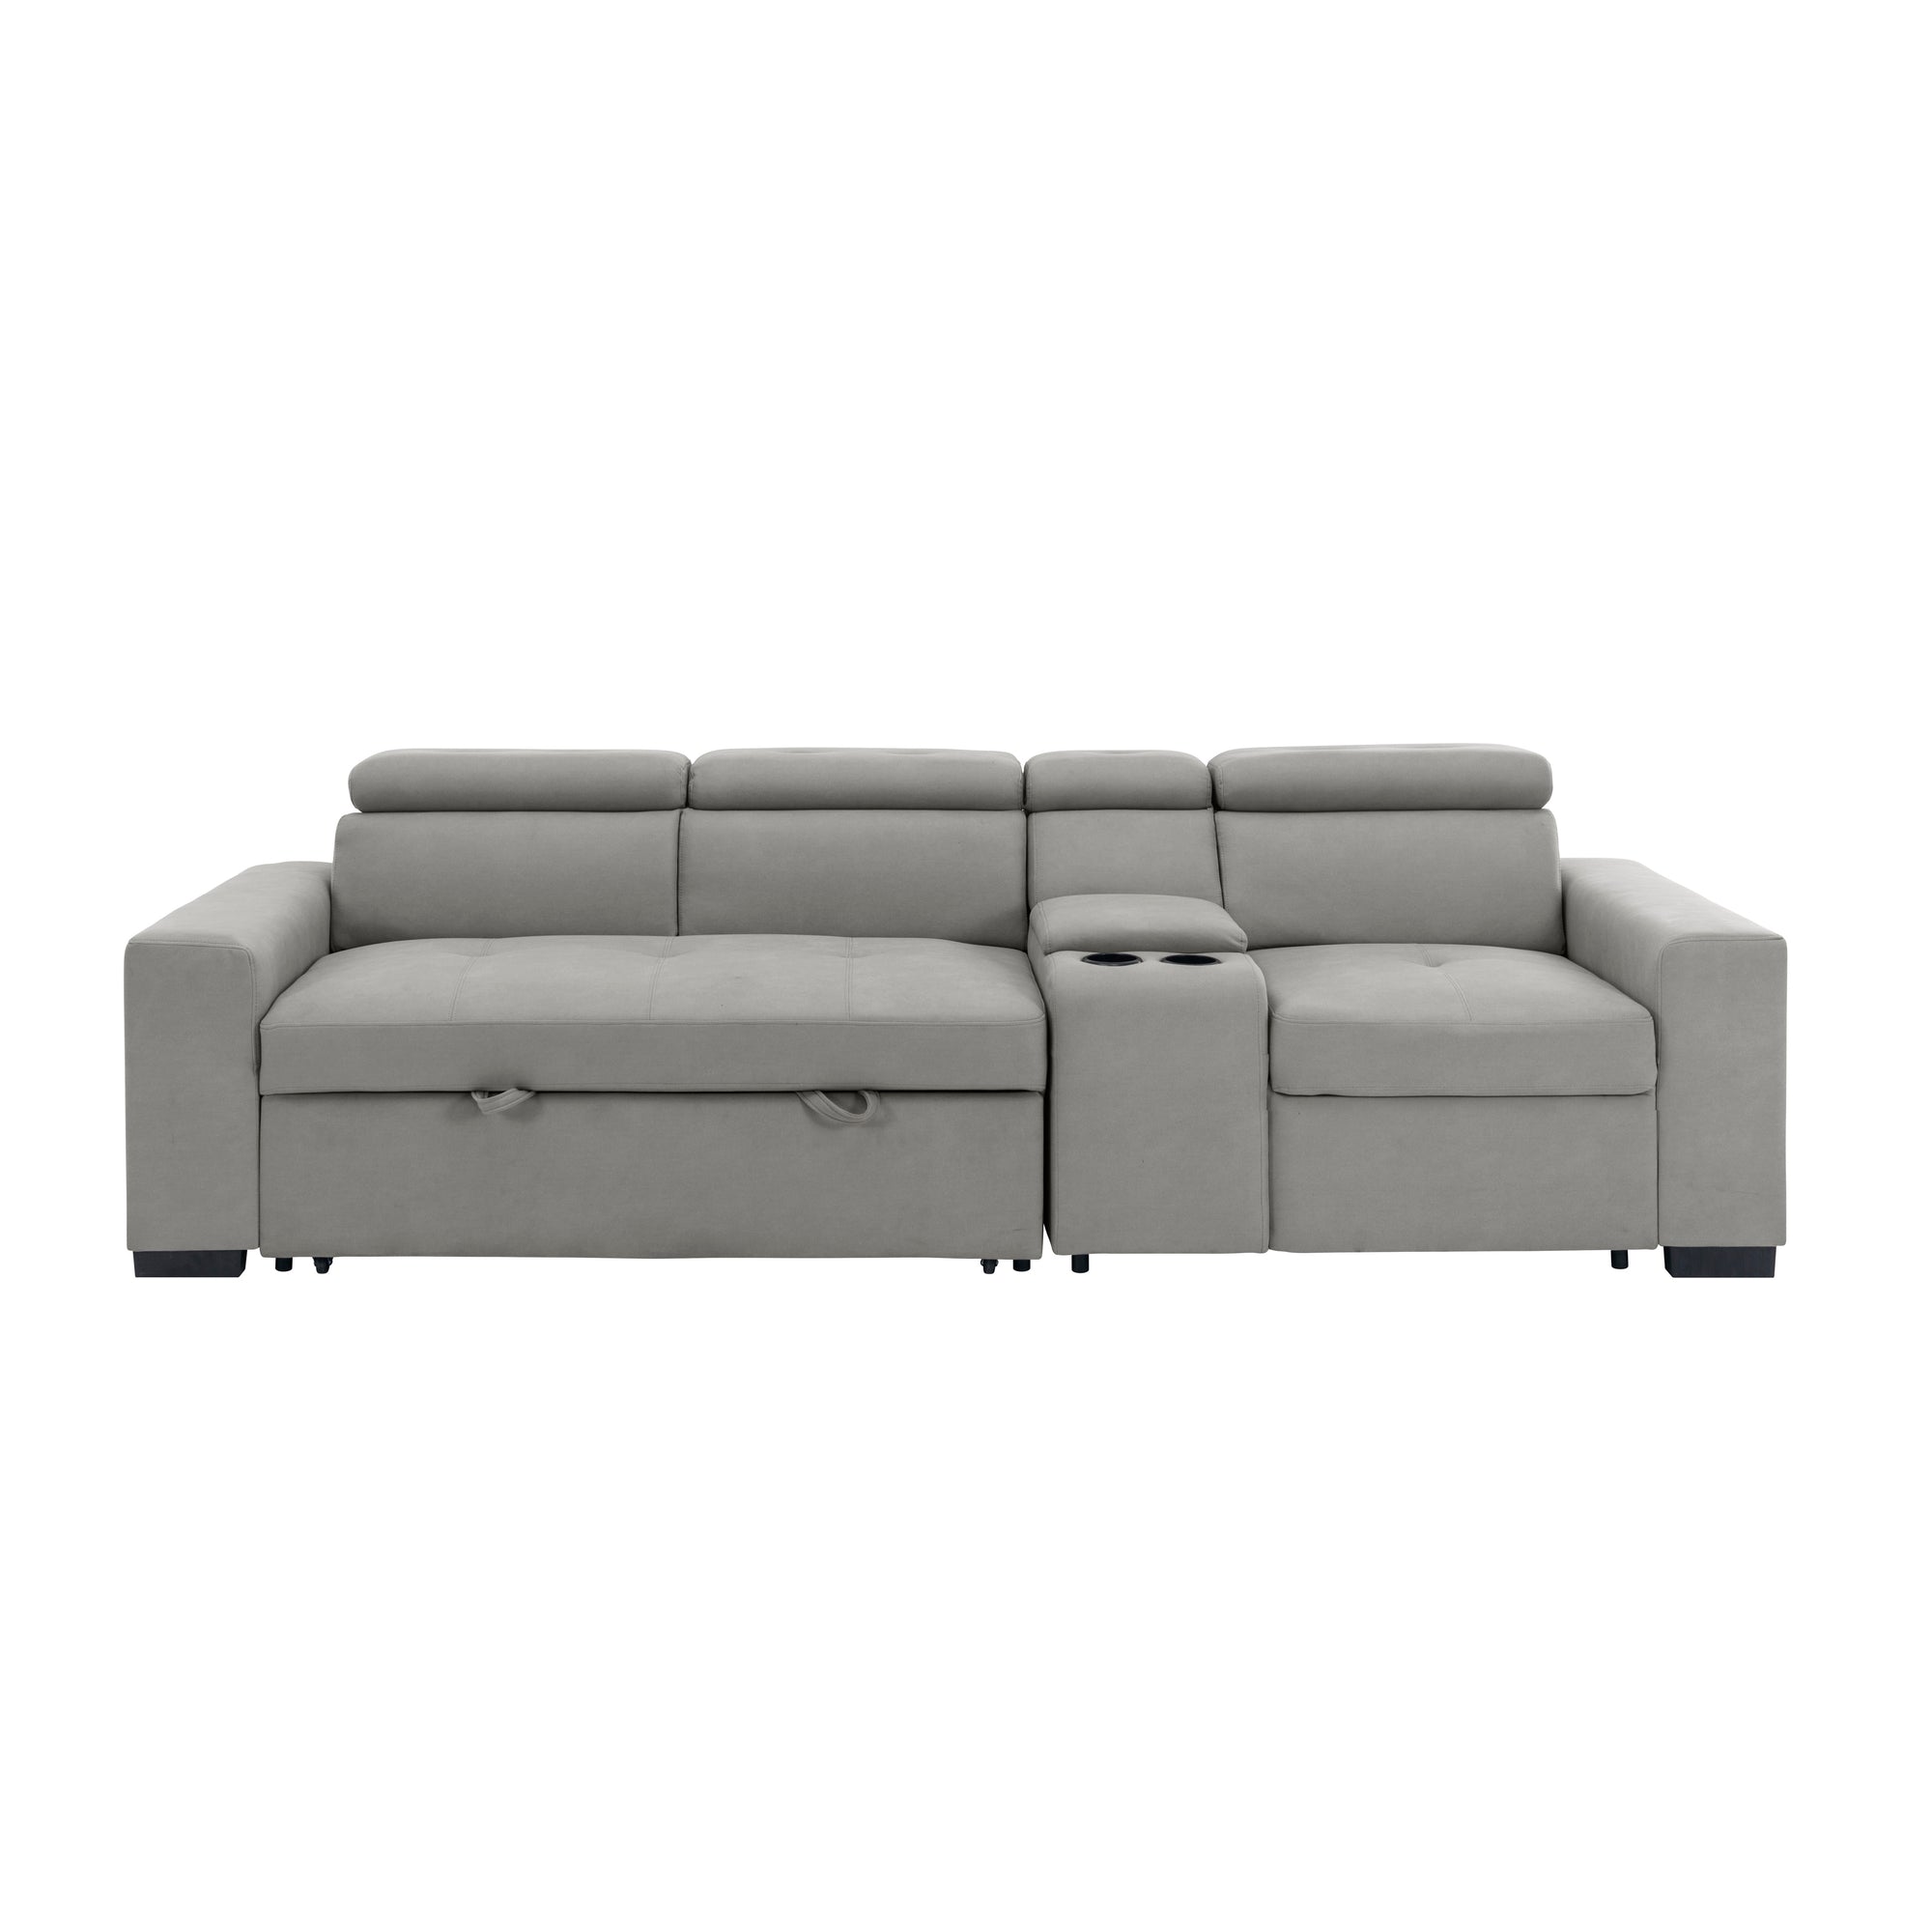 Harrisburg Polished Microfiber 2-Piece Sofa with Right Console